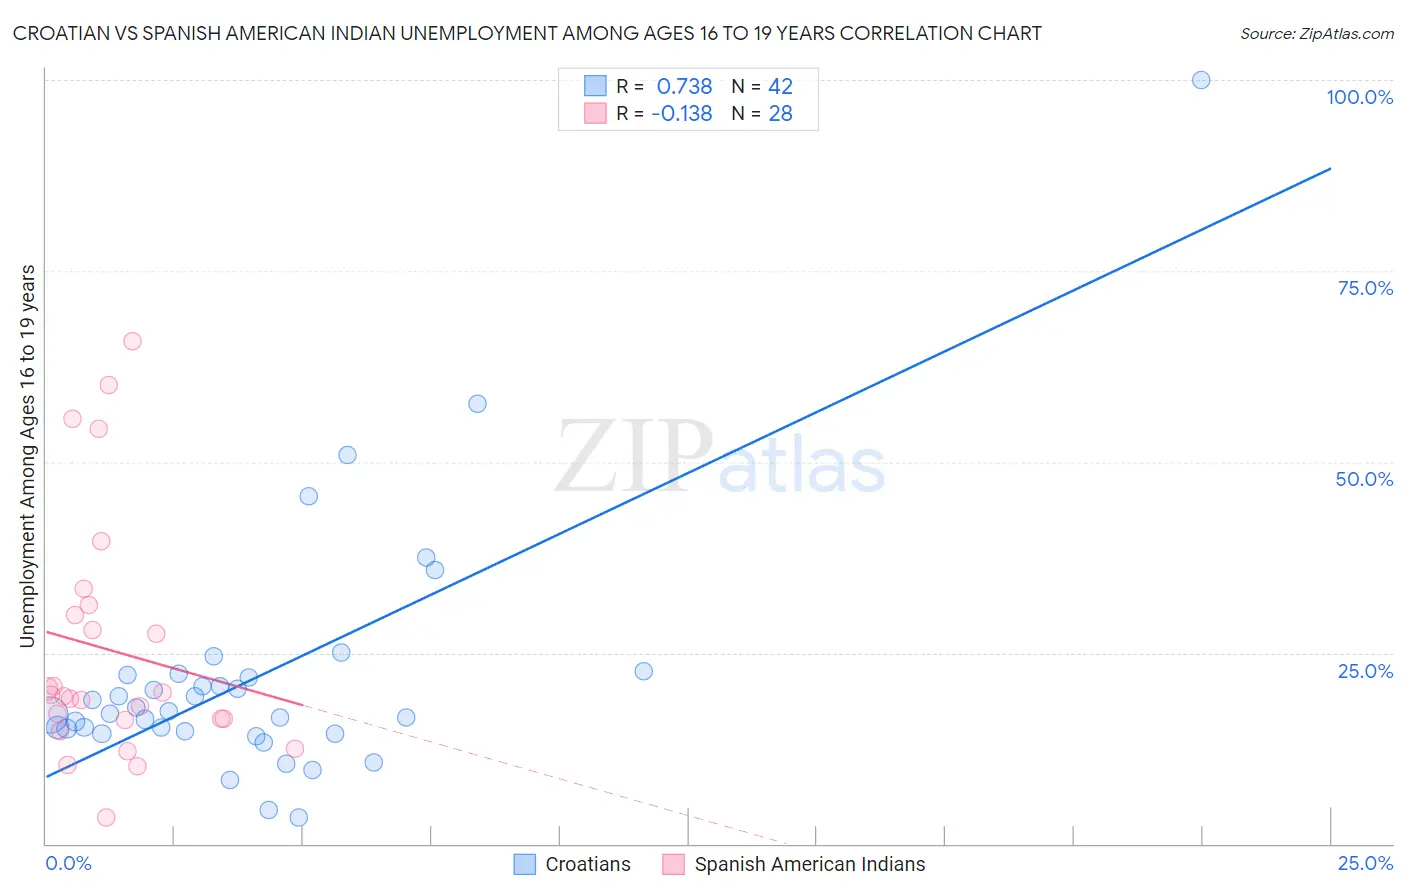 Croatian vs Spanish American Indian Unemployment Among Ages 16 to 19 years